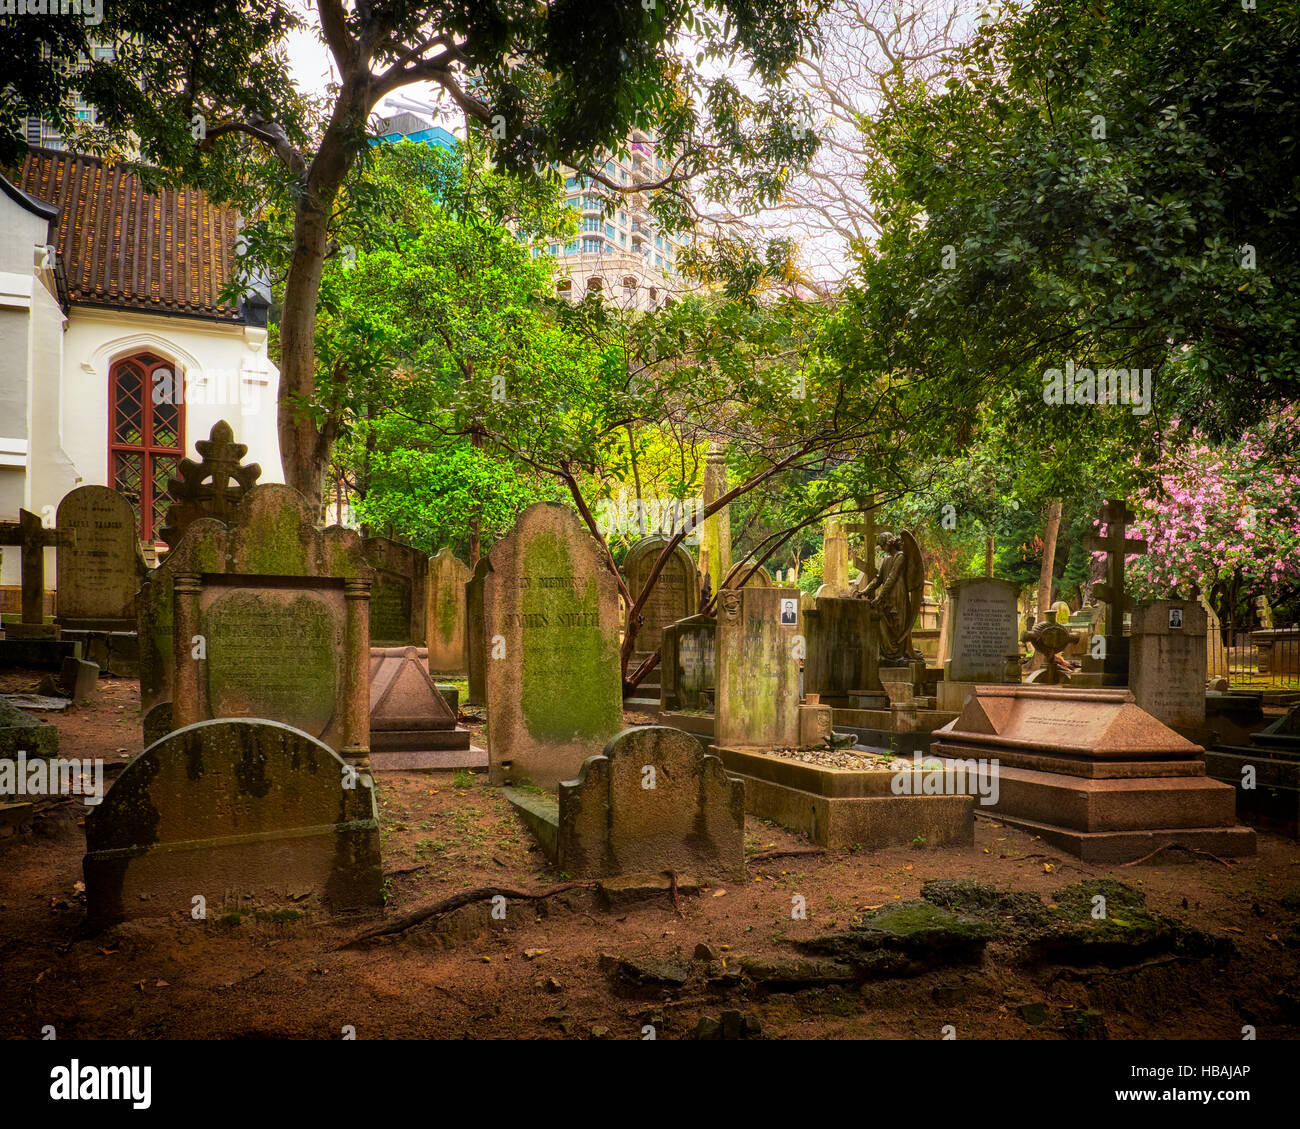 The historic Hong Kong Cemetery in Happy Valley in Hong Kong. This is one of the oldest cemeteries in Hong Kong. Stock Photo